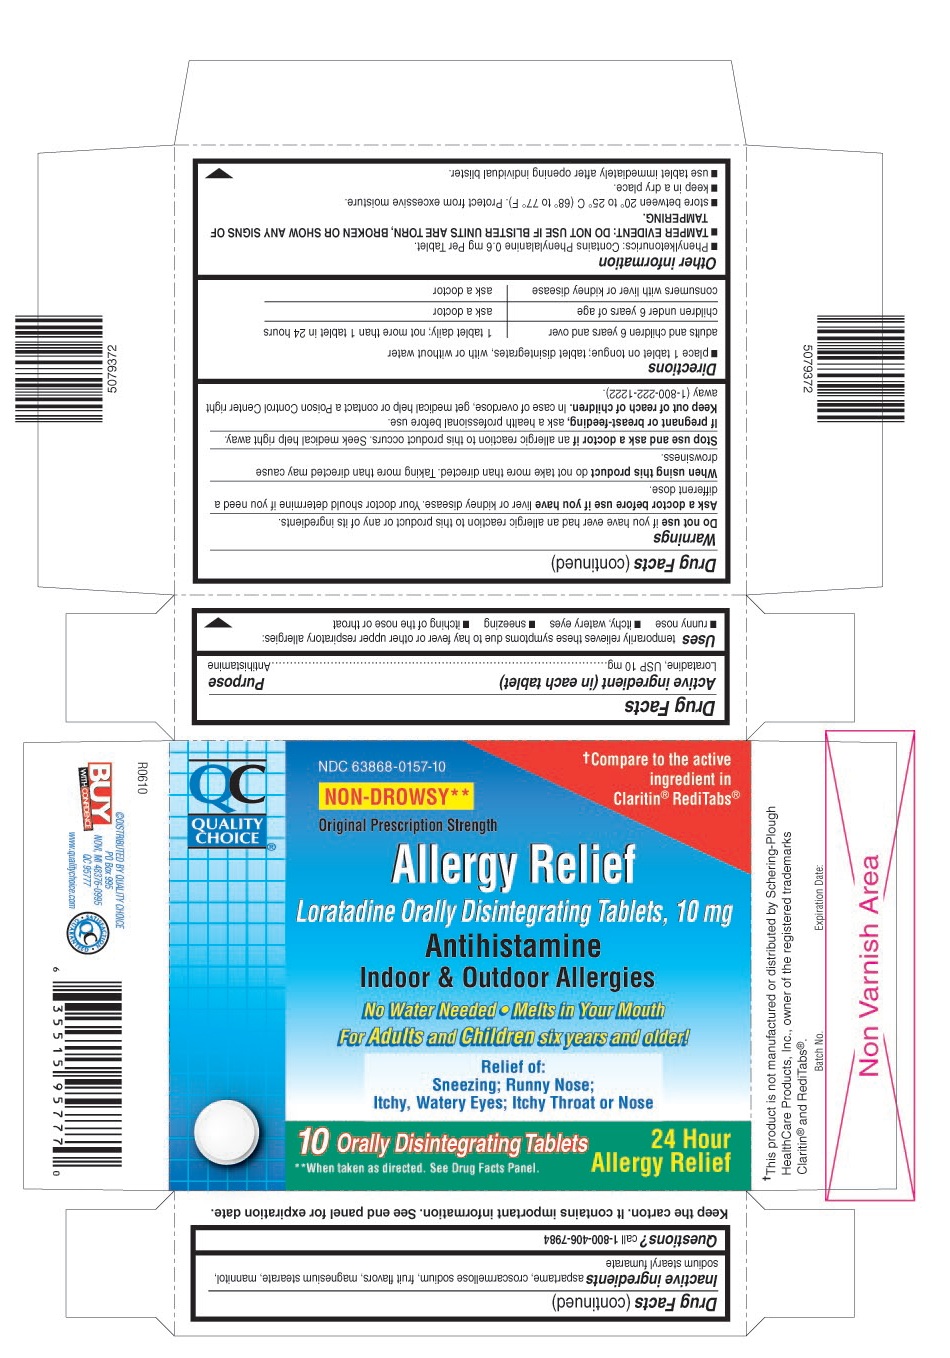 This is the 10 count blister carton label for Quality Choice Loratadine ODT, 10 mg.